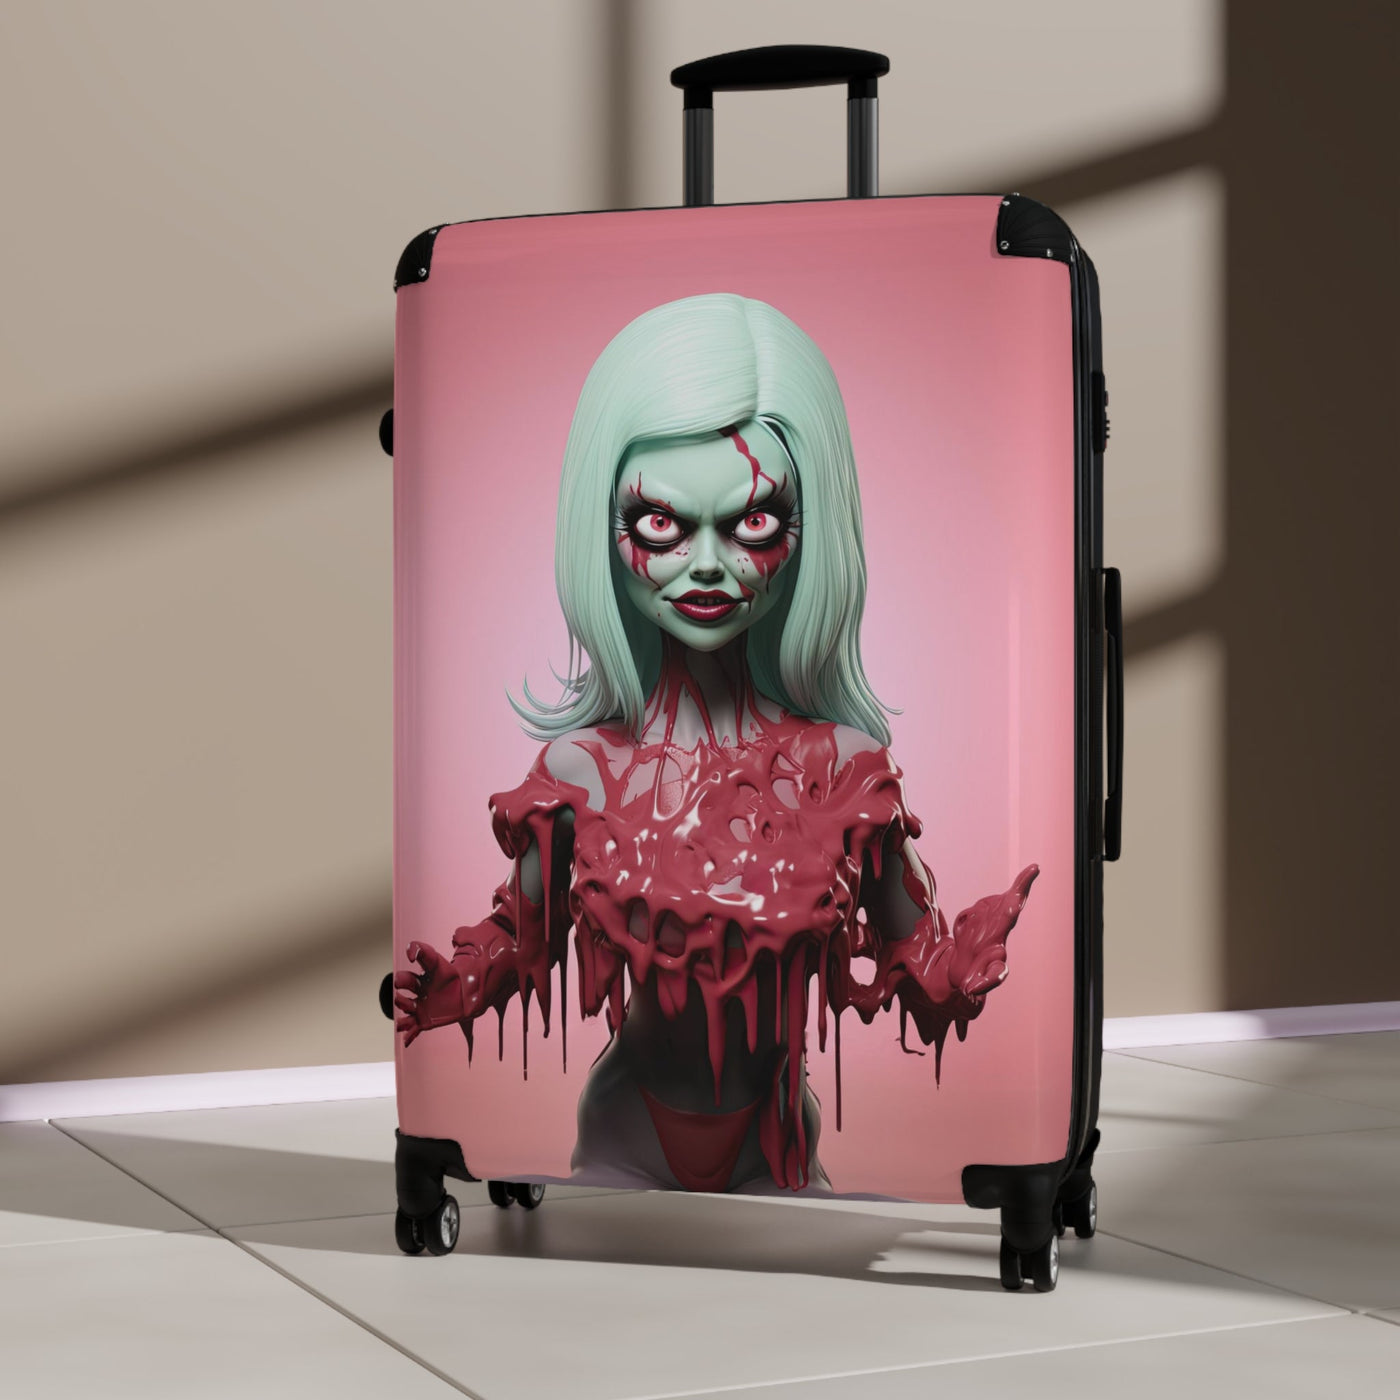 Choco Monster Doll Pop Surreal Travel Suitcase Luggage